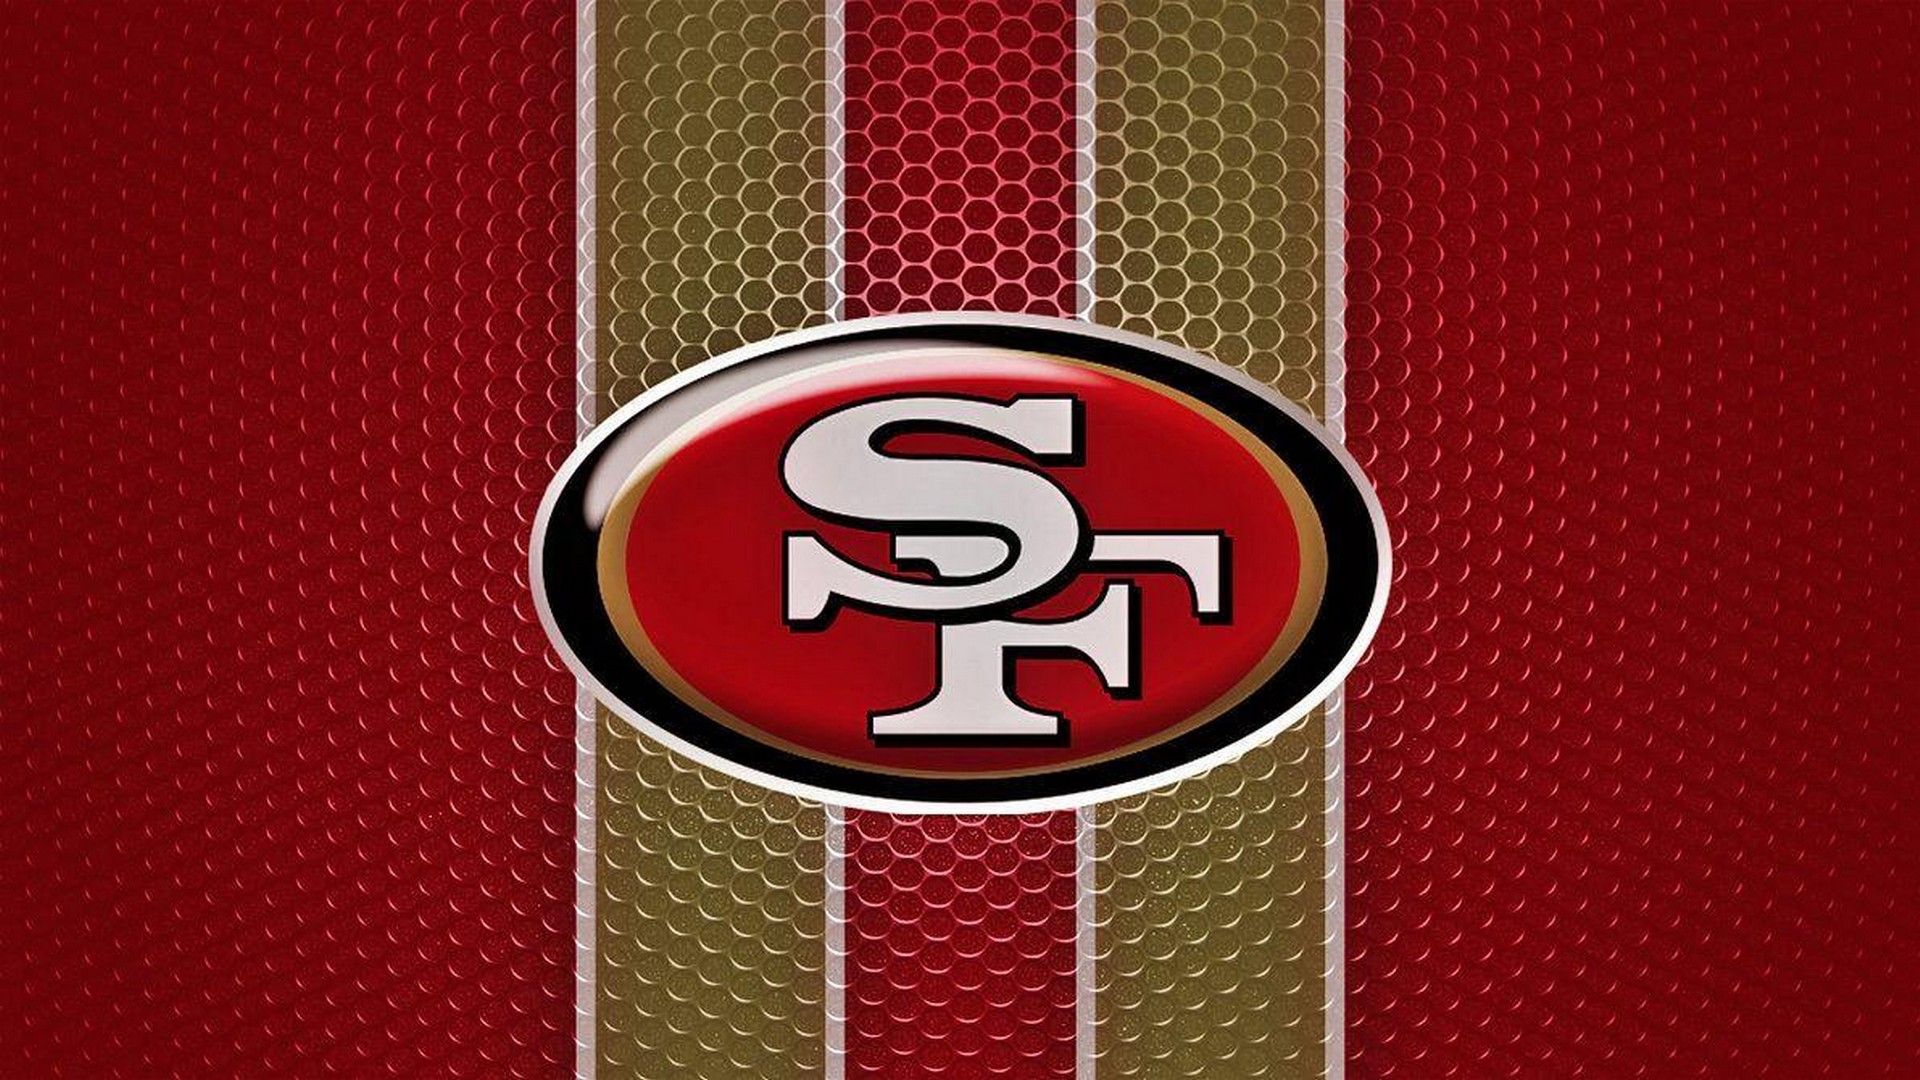 SF 49ers Wallpaper Free SF 49ers Background